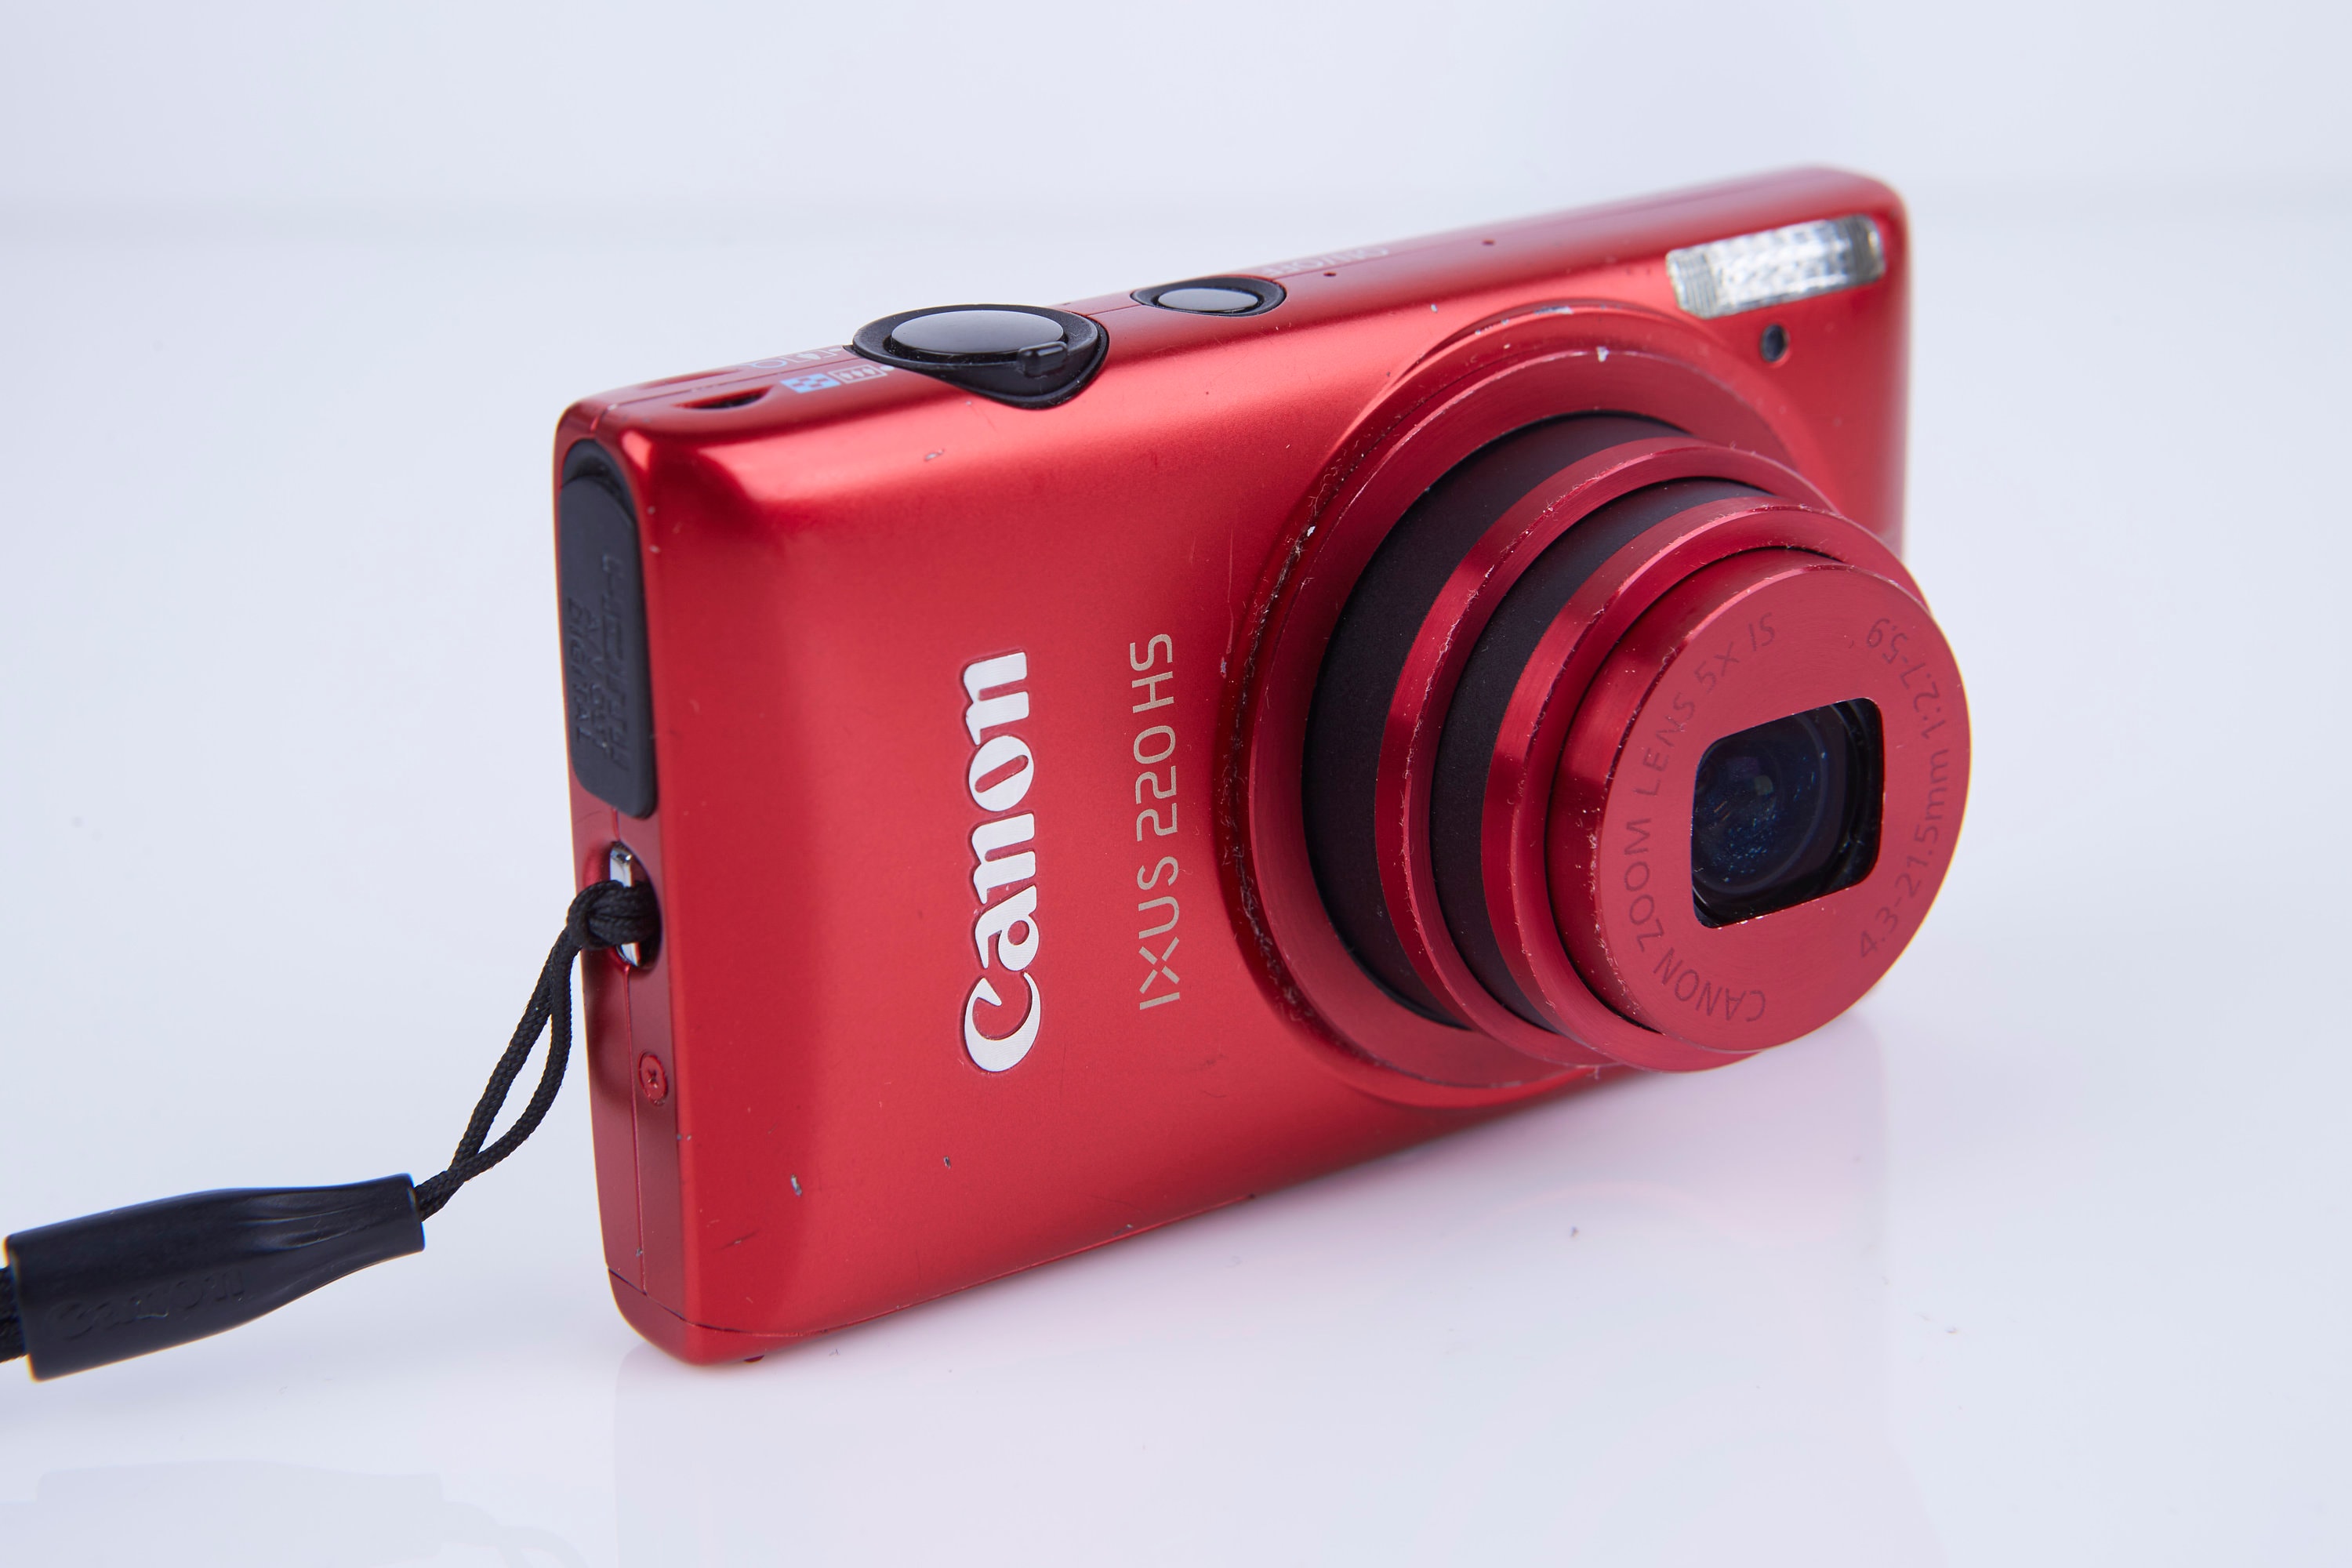 Canon IXUS 170 -Specification - PowerShot and IXUS digital compact cameras  - Canon Central and North Africa